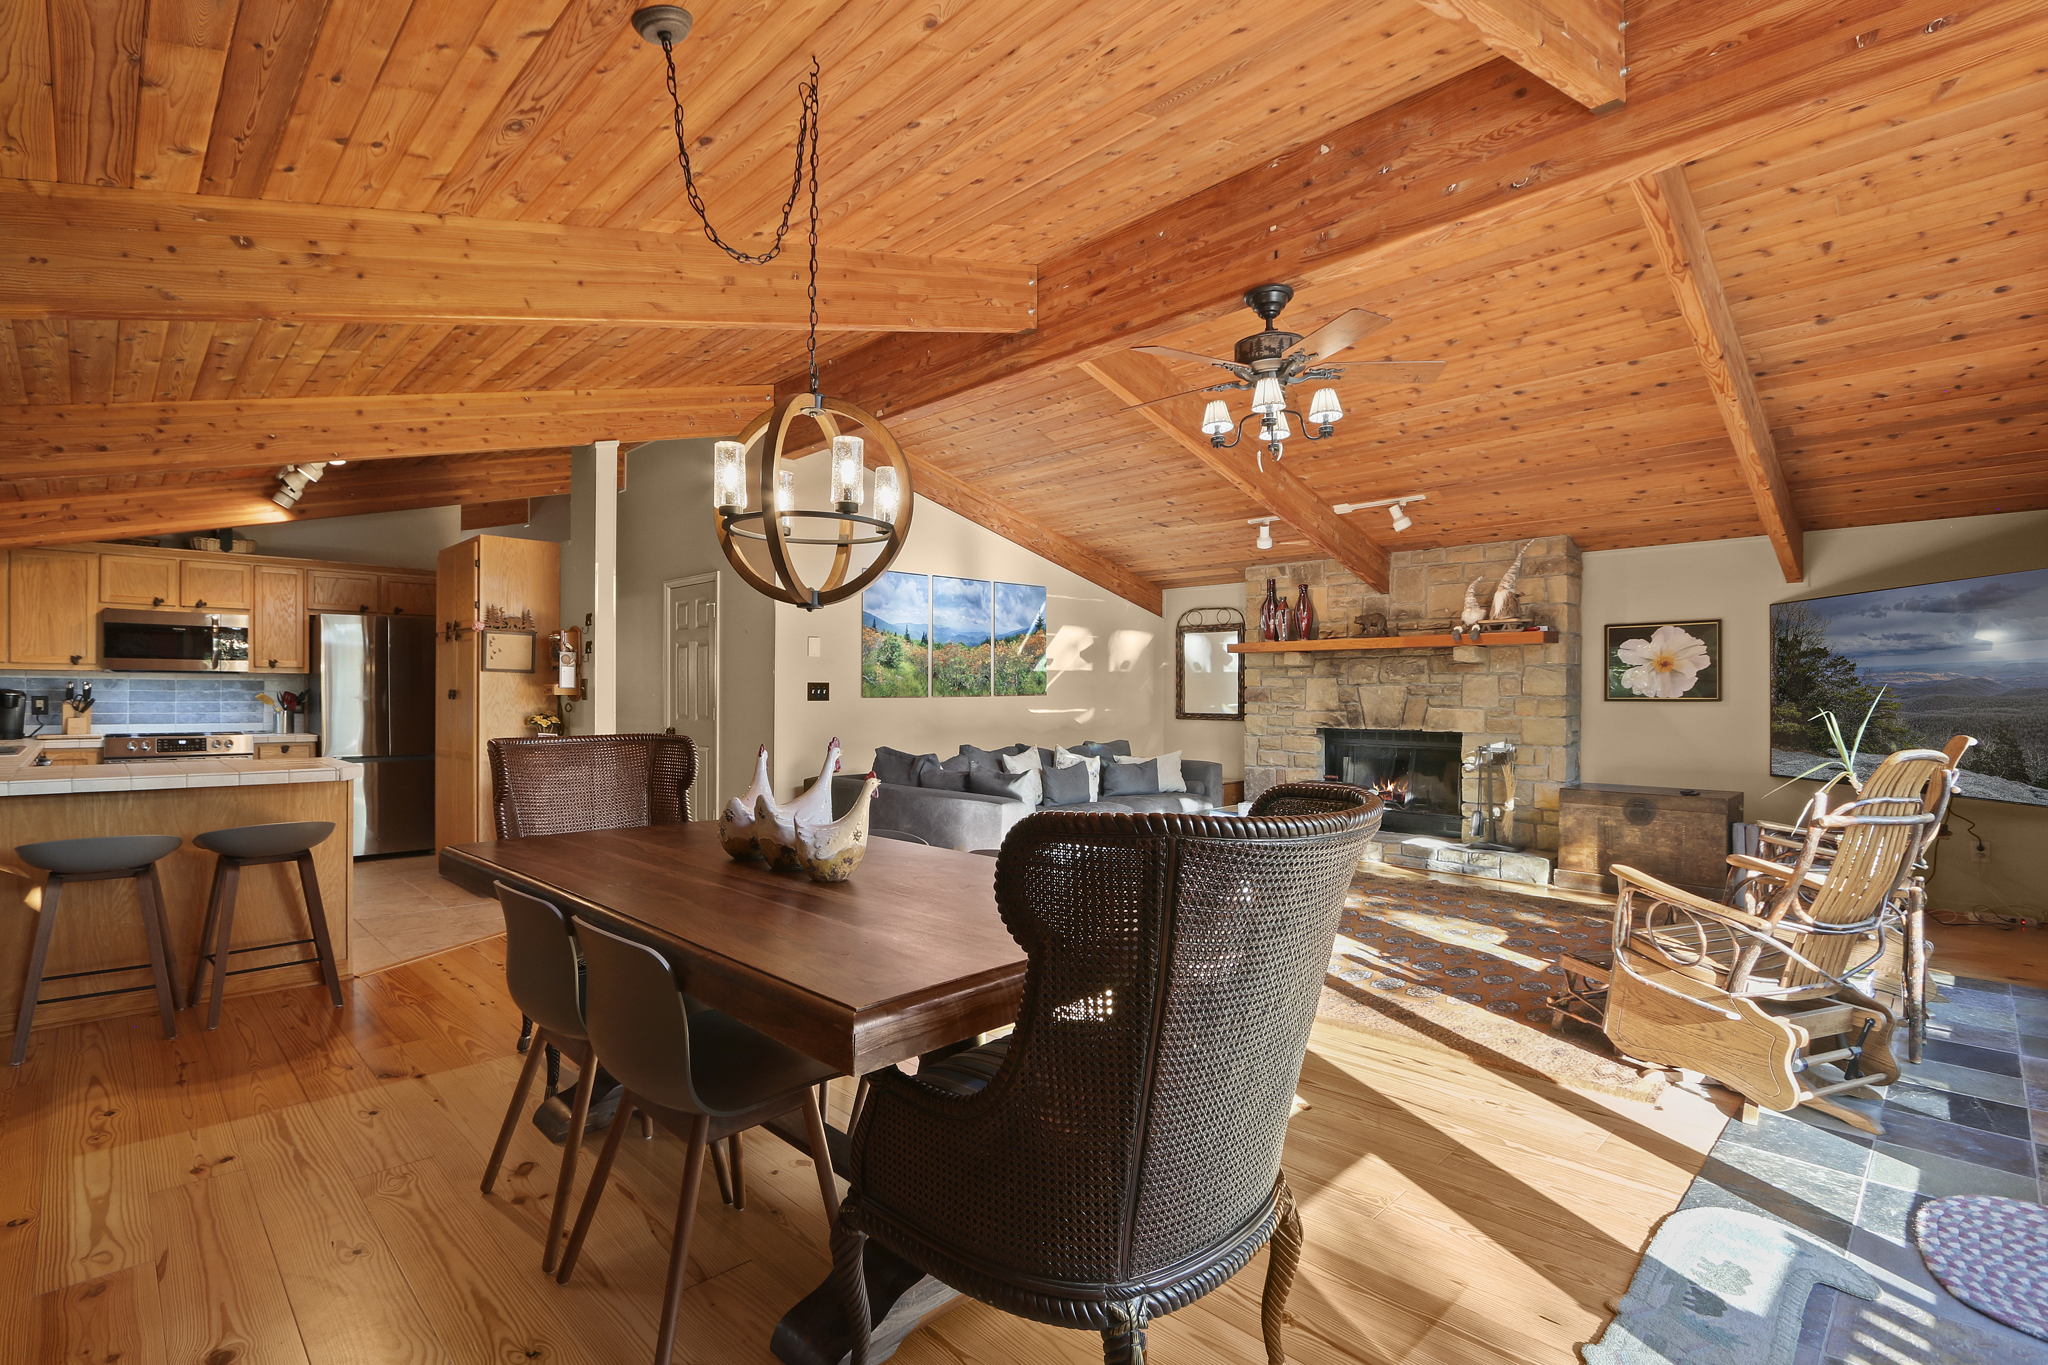 Adjacent to the living room, the cozy dining area invites you to enjoy a home-cooked meal at the rustic dining table.